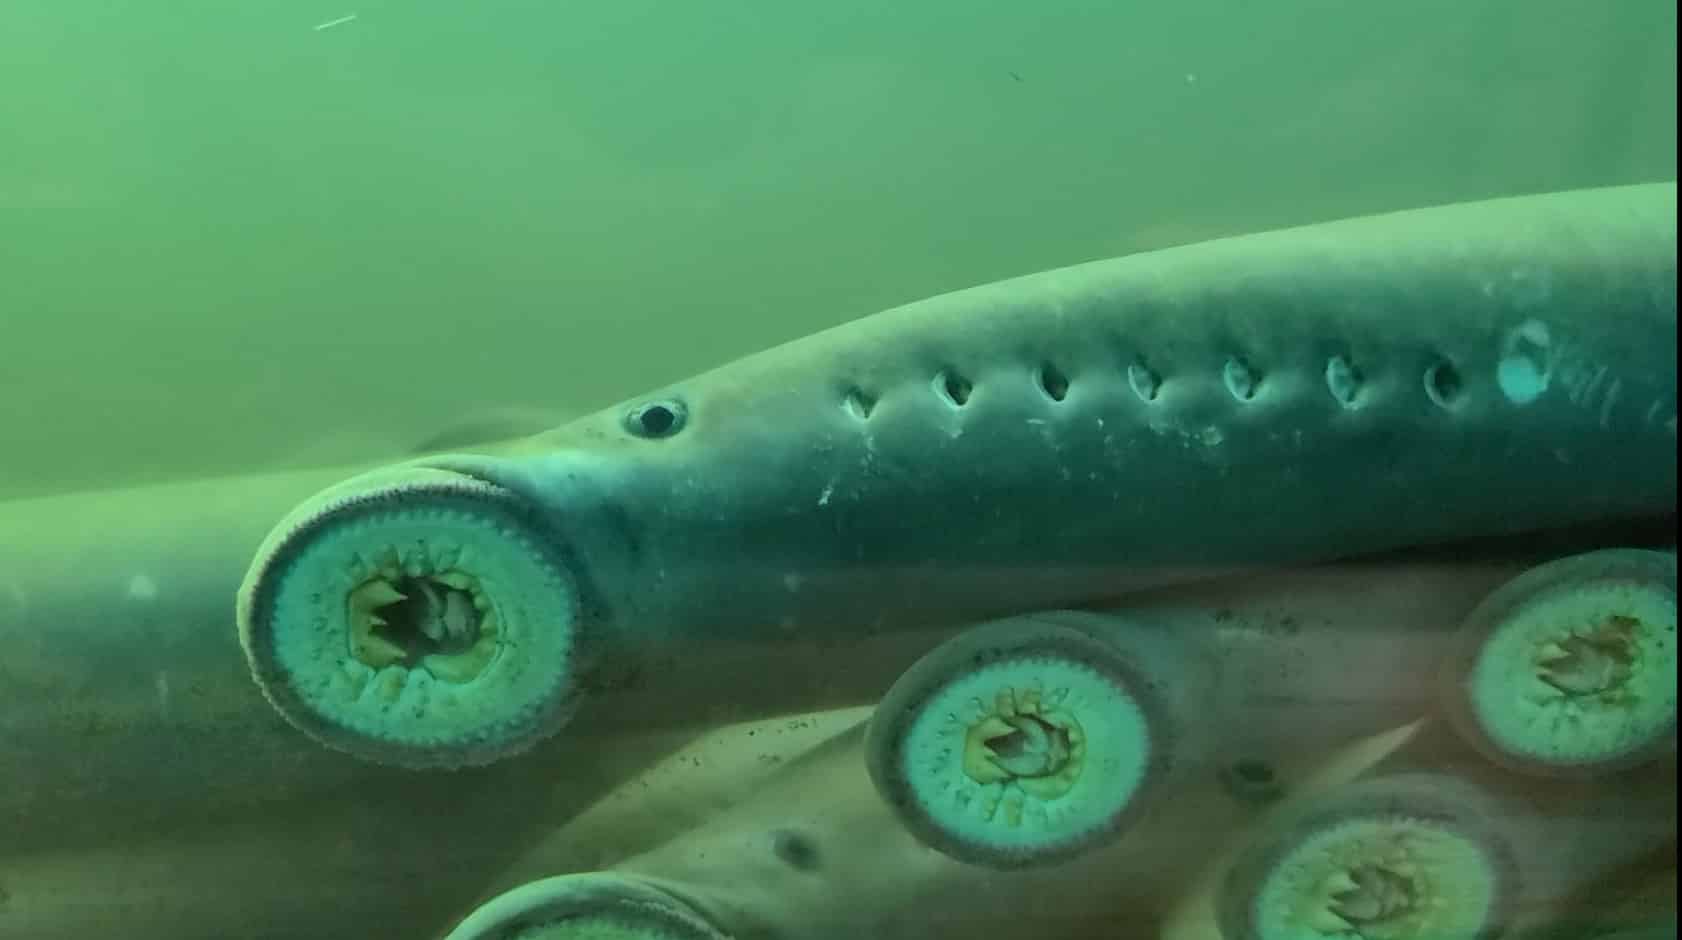 Pacific lamprey numbers surge in Columbia River Gorge | Courthouse News ...